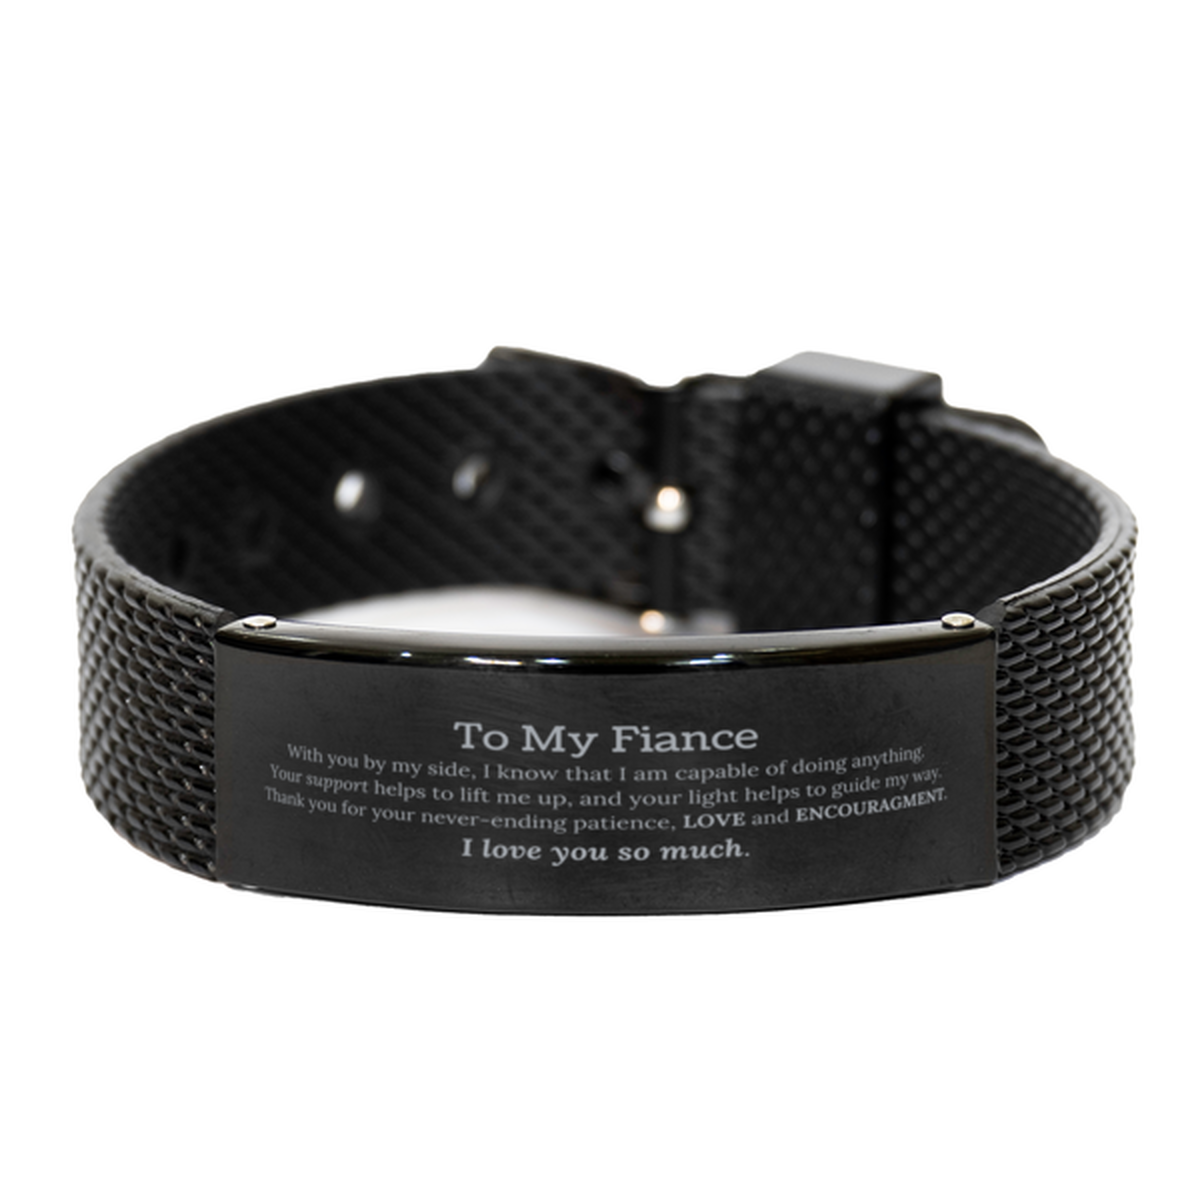 Appreciation Fiance Black Shark Mesh Bracelet Gifts, To My Fiance Birthday Christmas Wedding Keepsake Gifts for Fiance With you by my side, I know that I am capable of doing anything. I love you so much